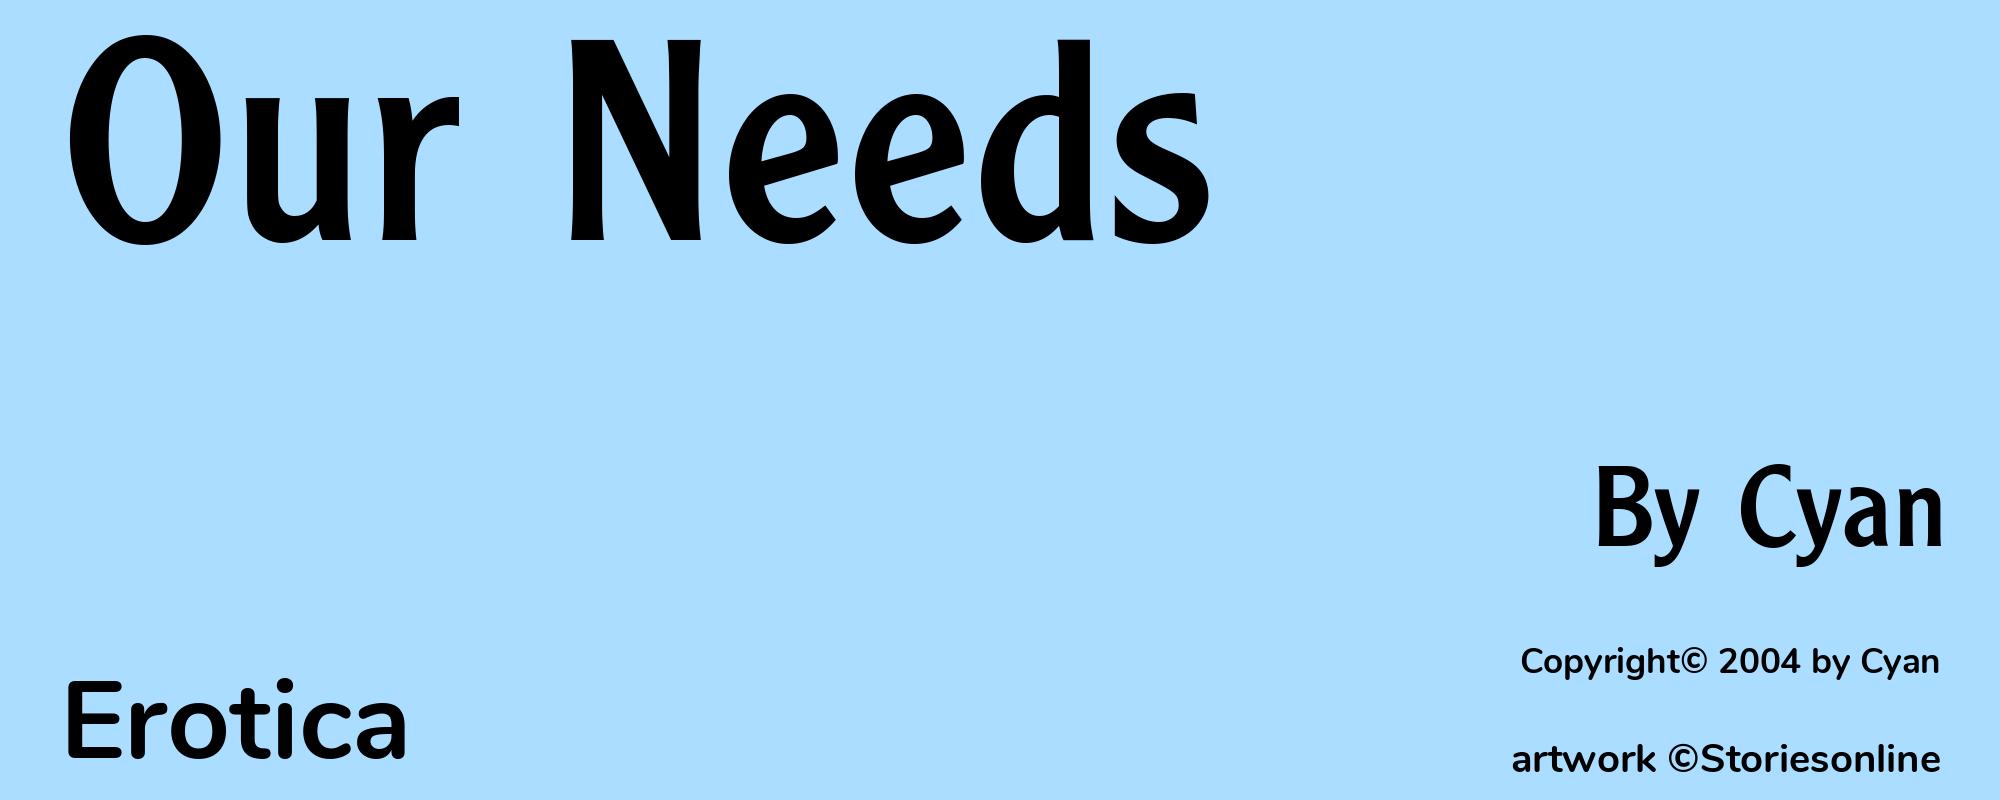 Our Needs - Cover